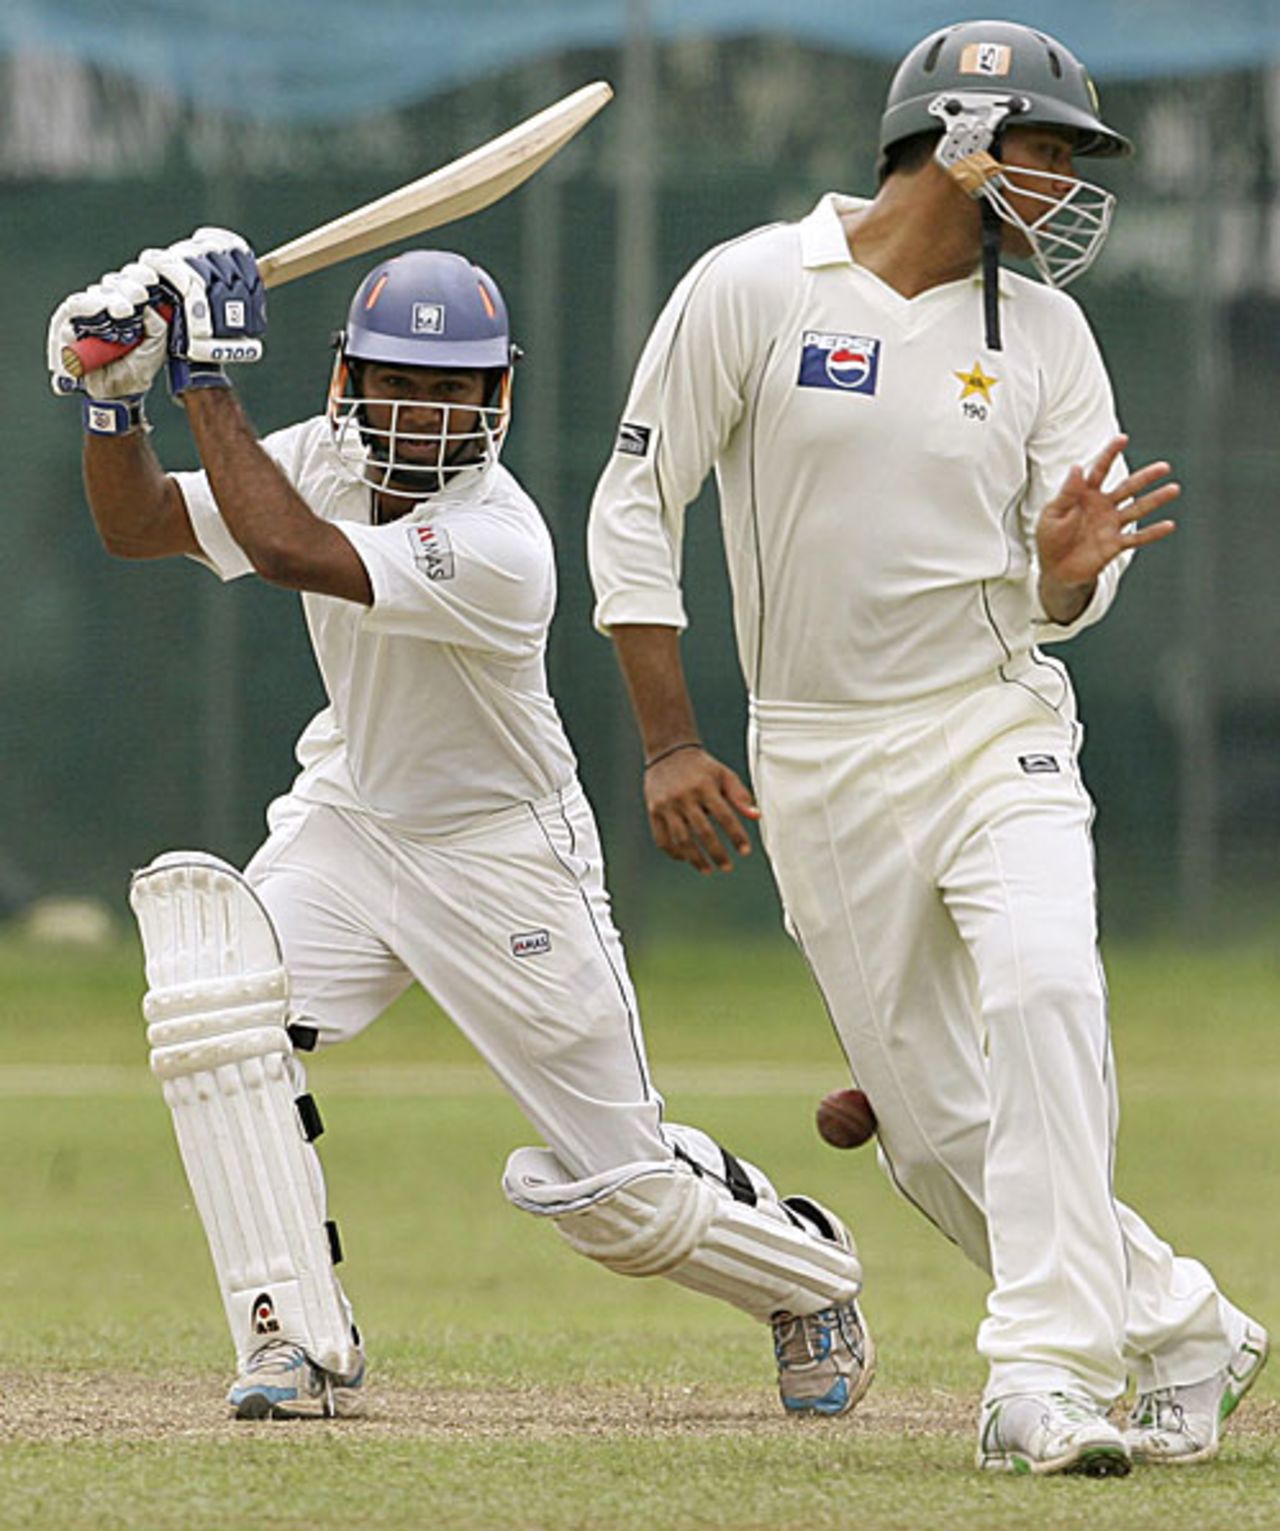 Gihan Rupasinghe plays a square drive, Sri Lanka Cricket XI v Pakistanis, 2nd day, Colts Cricket Club Ground, Colombo, June 30, 2009